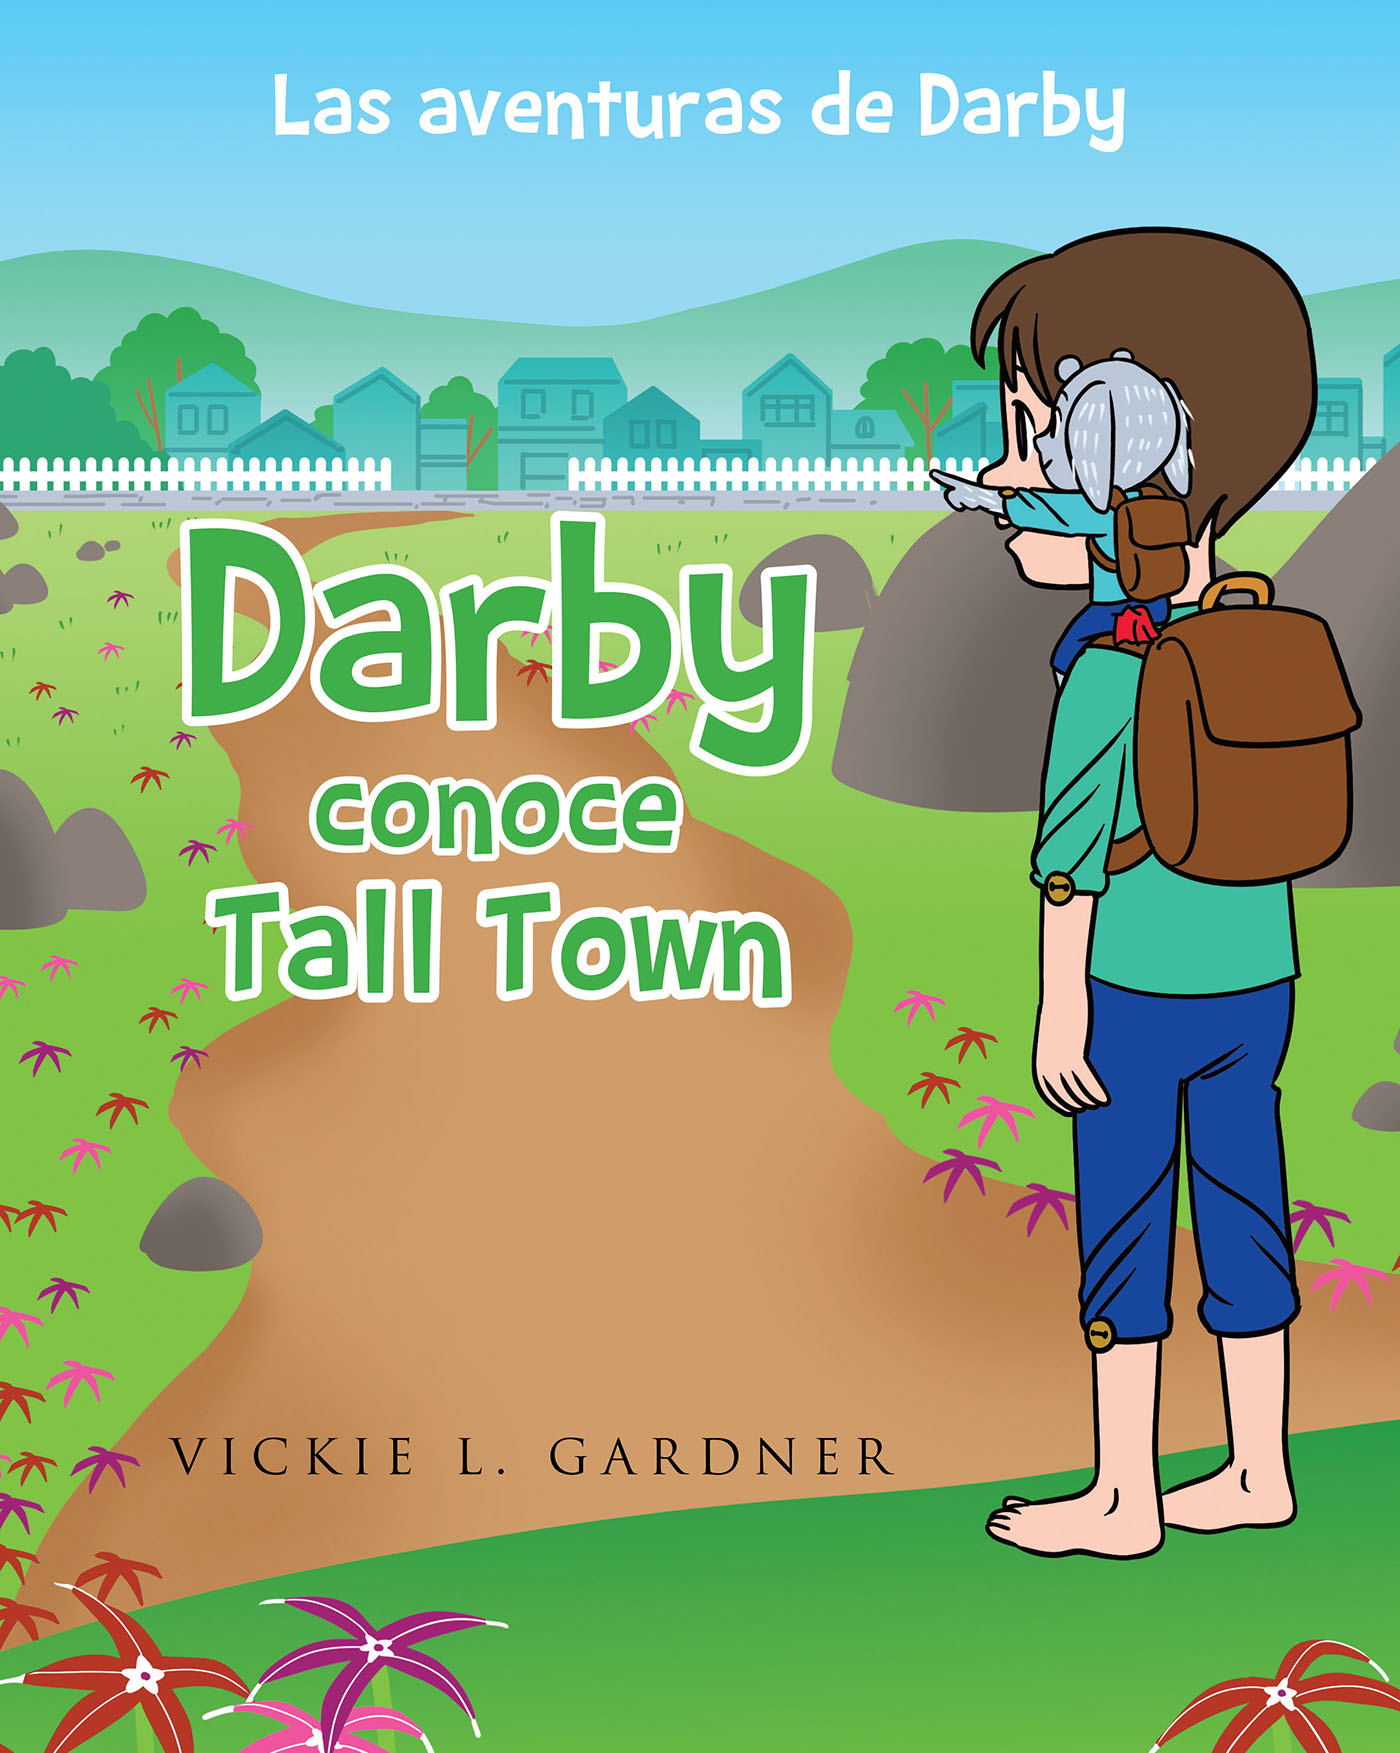 Darby conoce Tall Town Cover Image